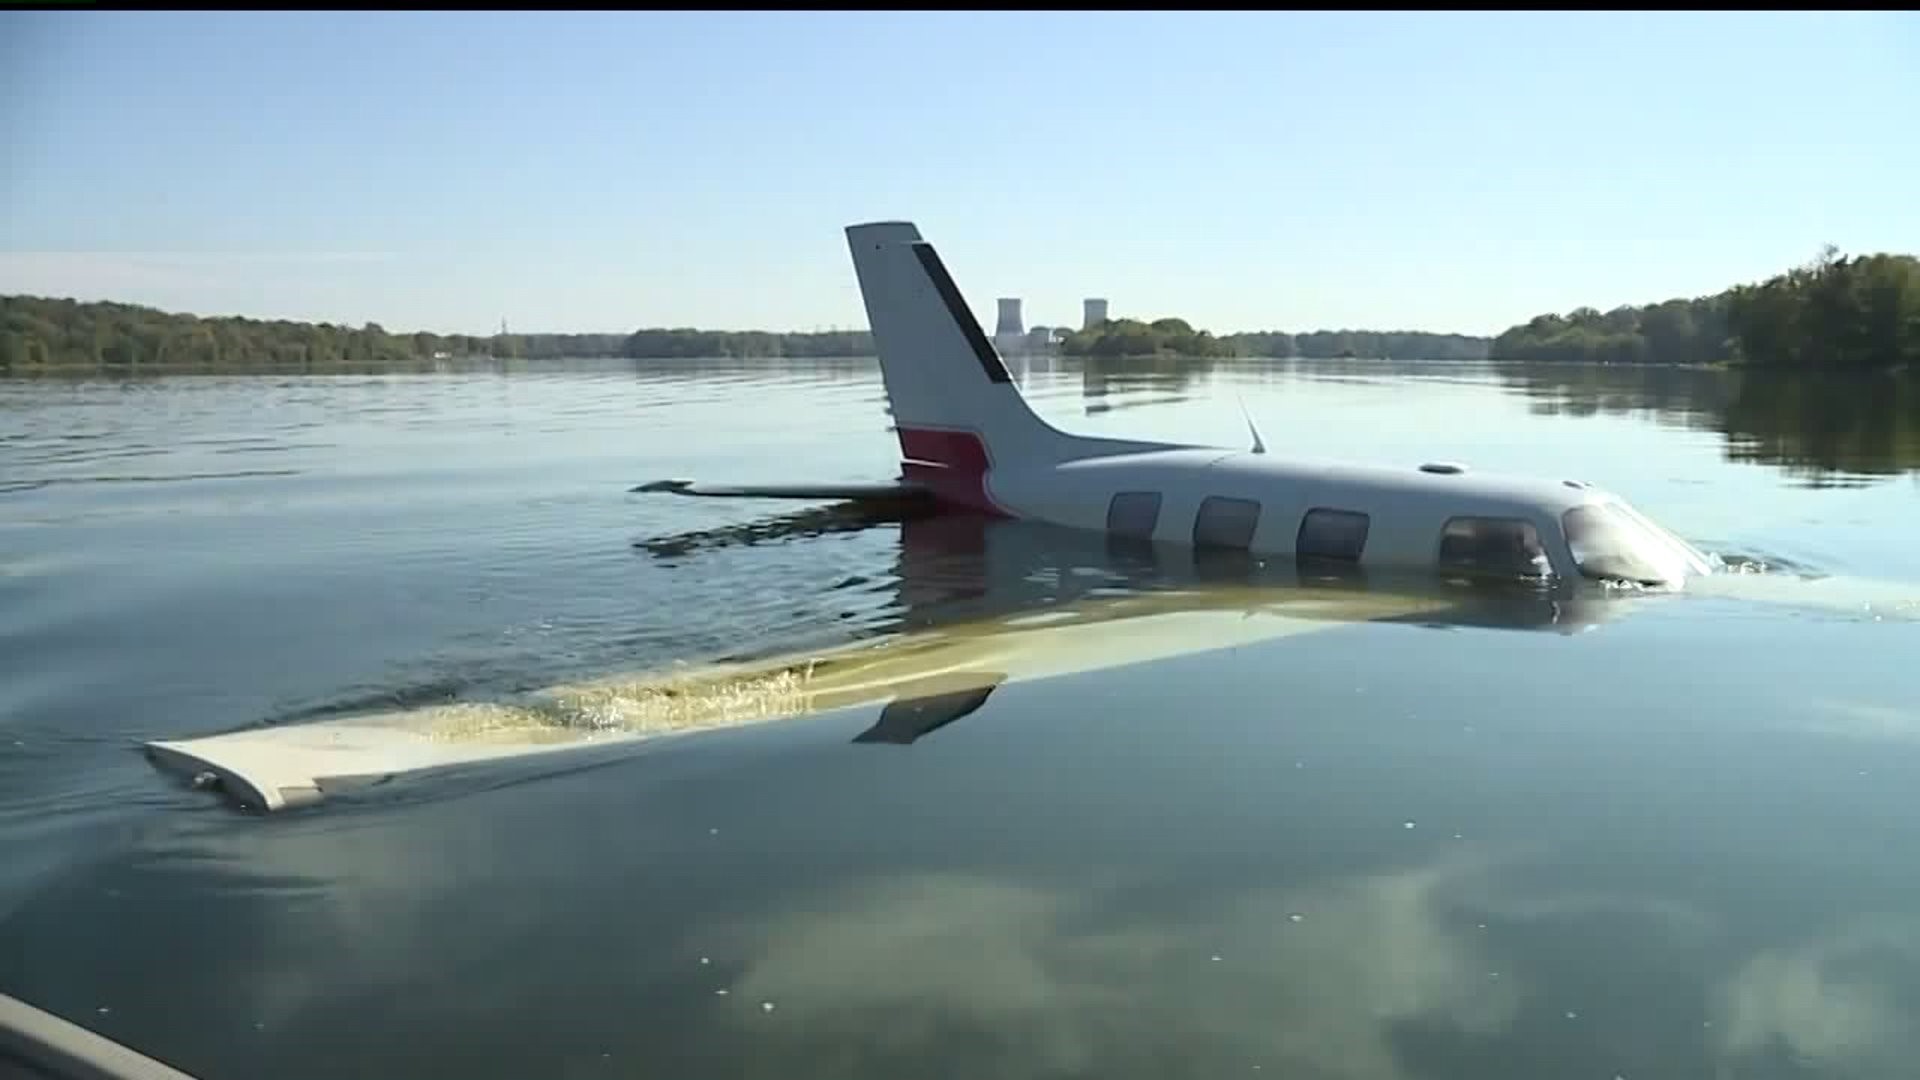 Removal of plane in Susquehanna river to happen Wednesday, weather depending